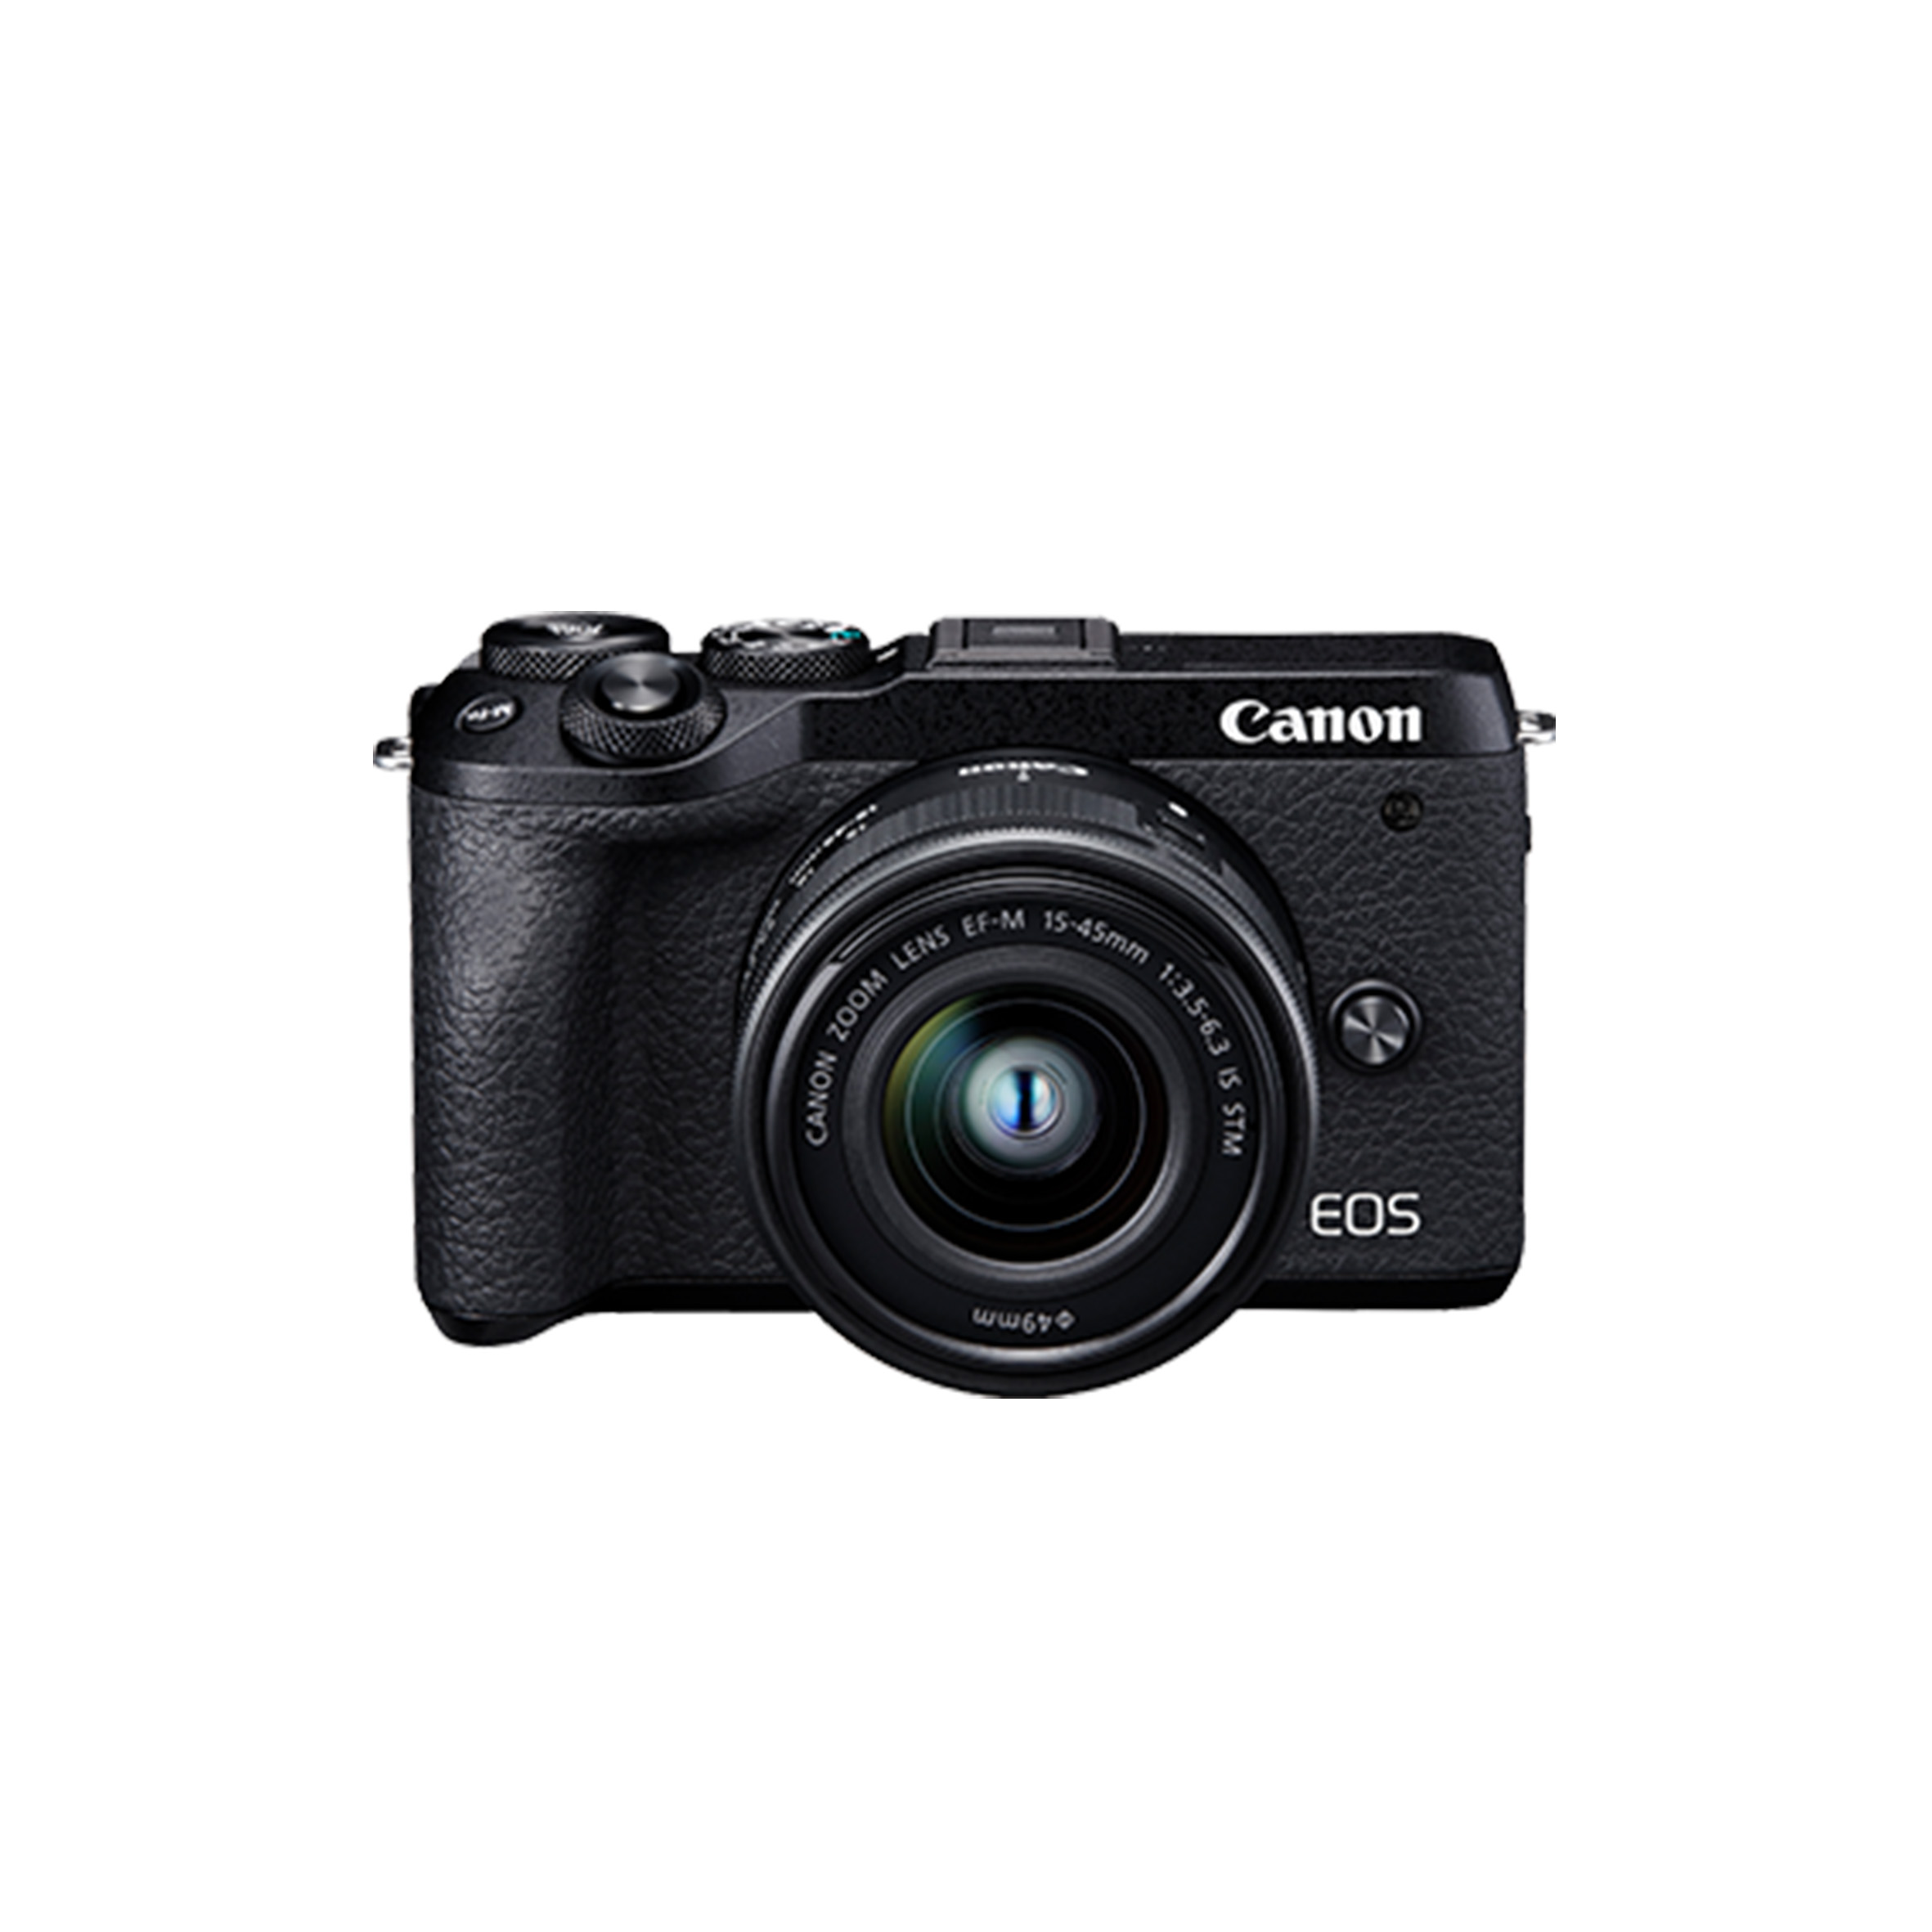 Canon EOS M6 Mark II (EF-M15-45mm f/3.5-6.3 IS STM)